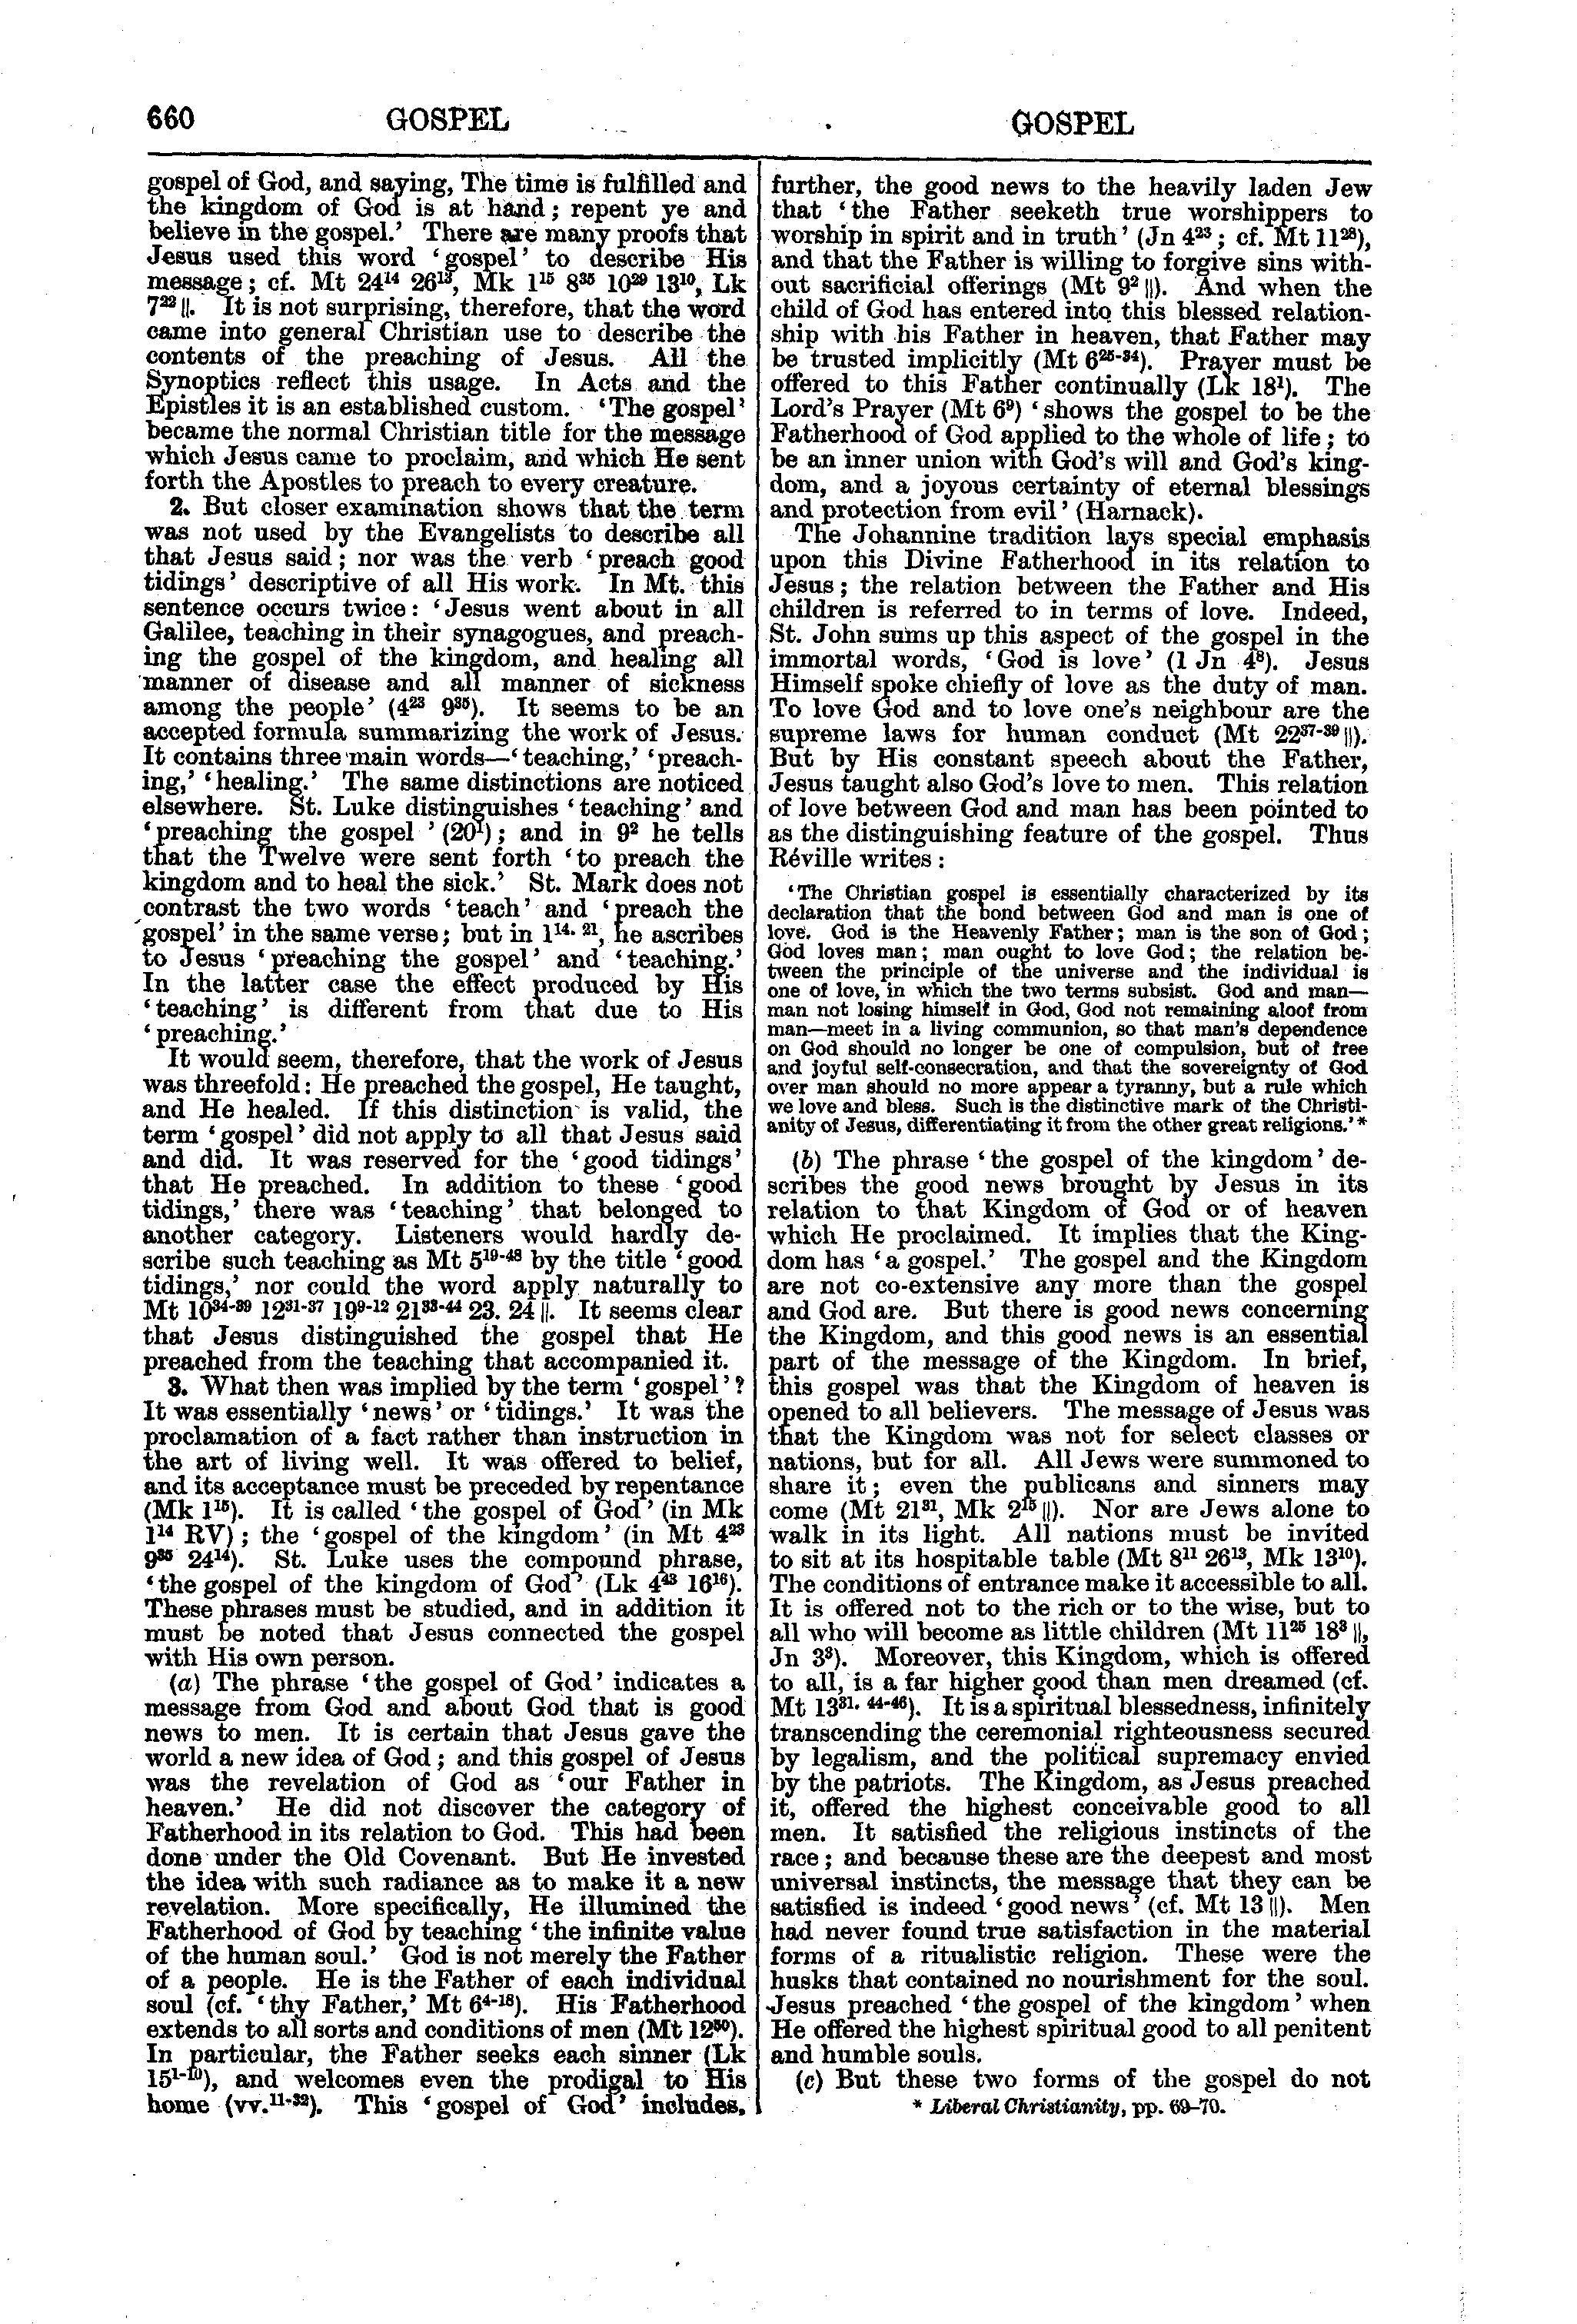 Image of page 660